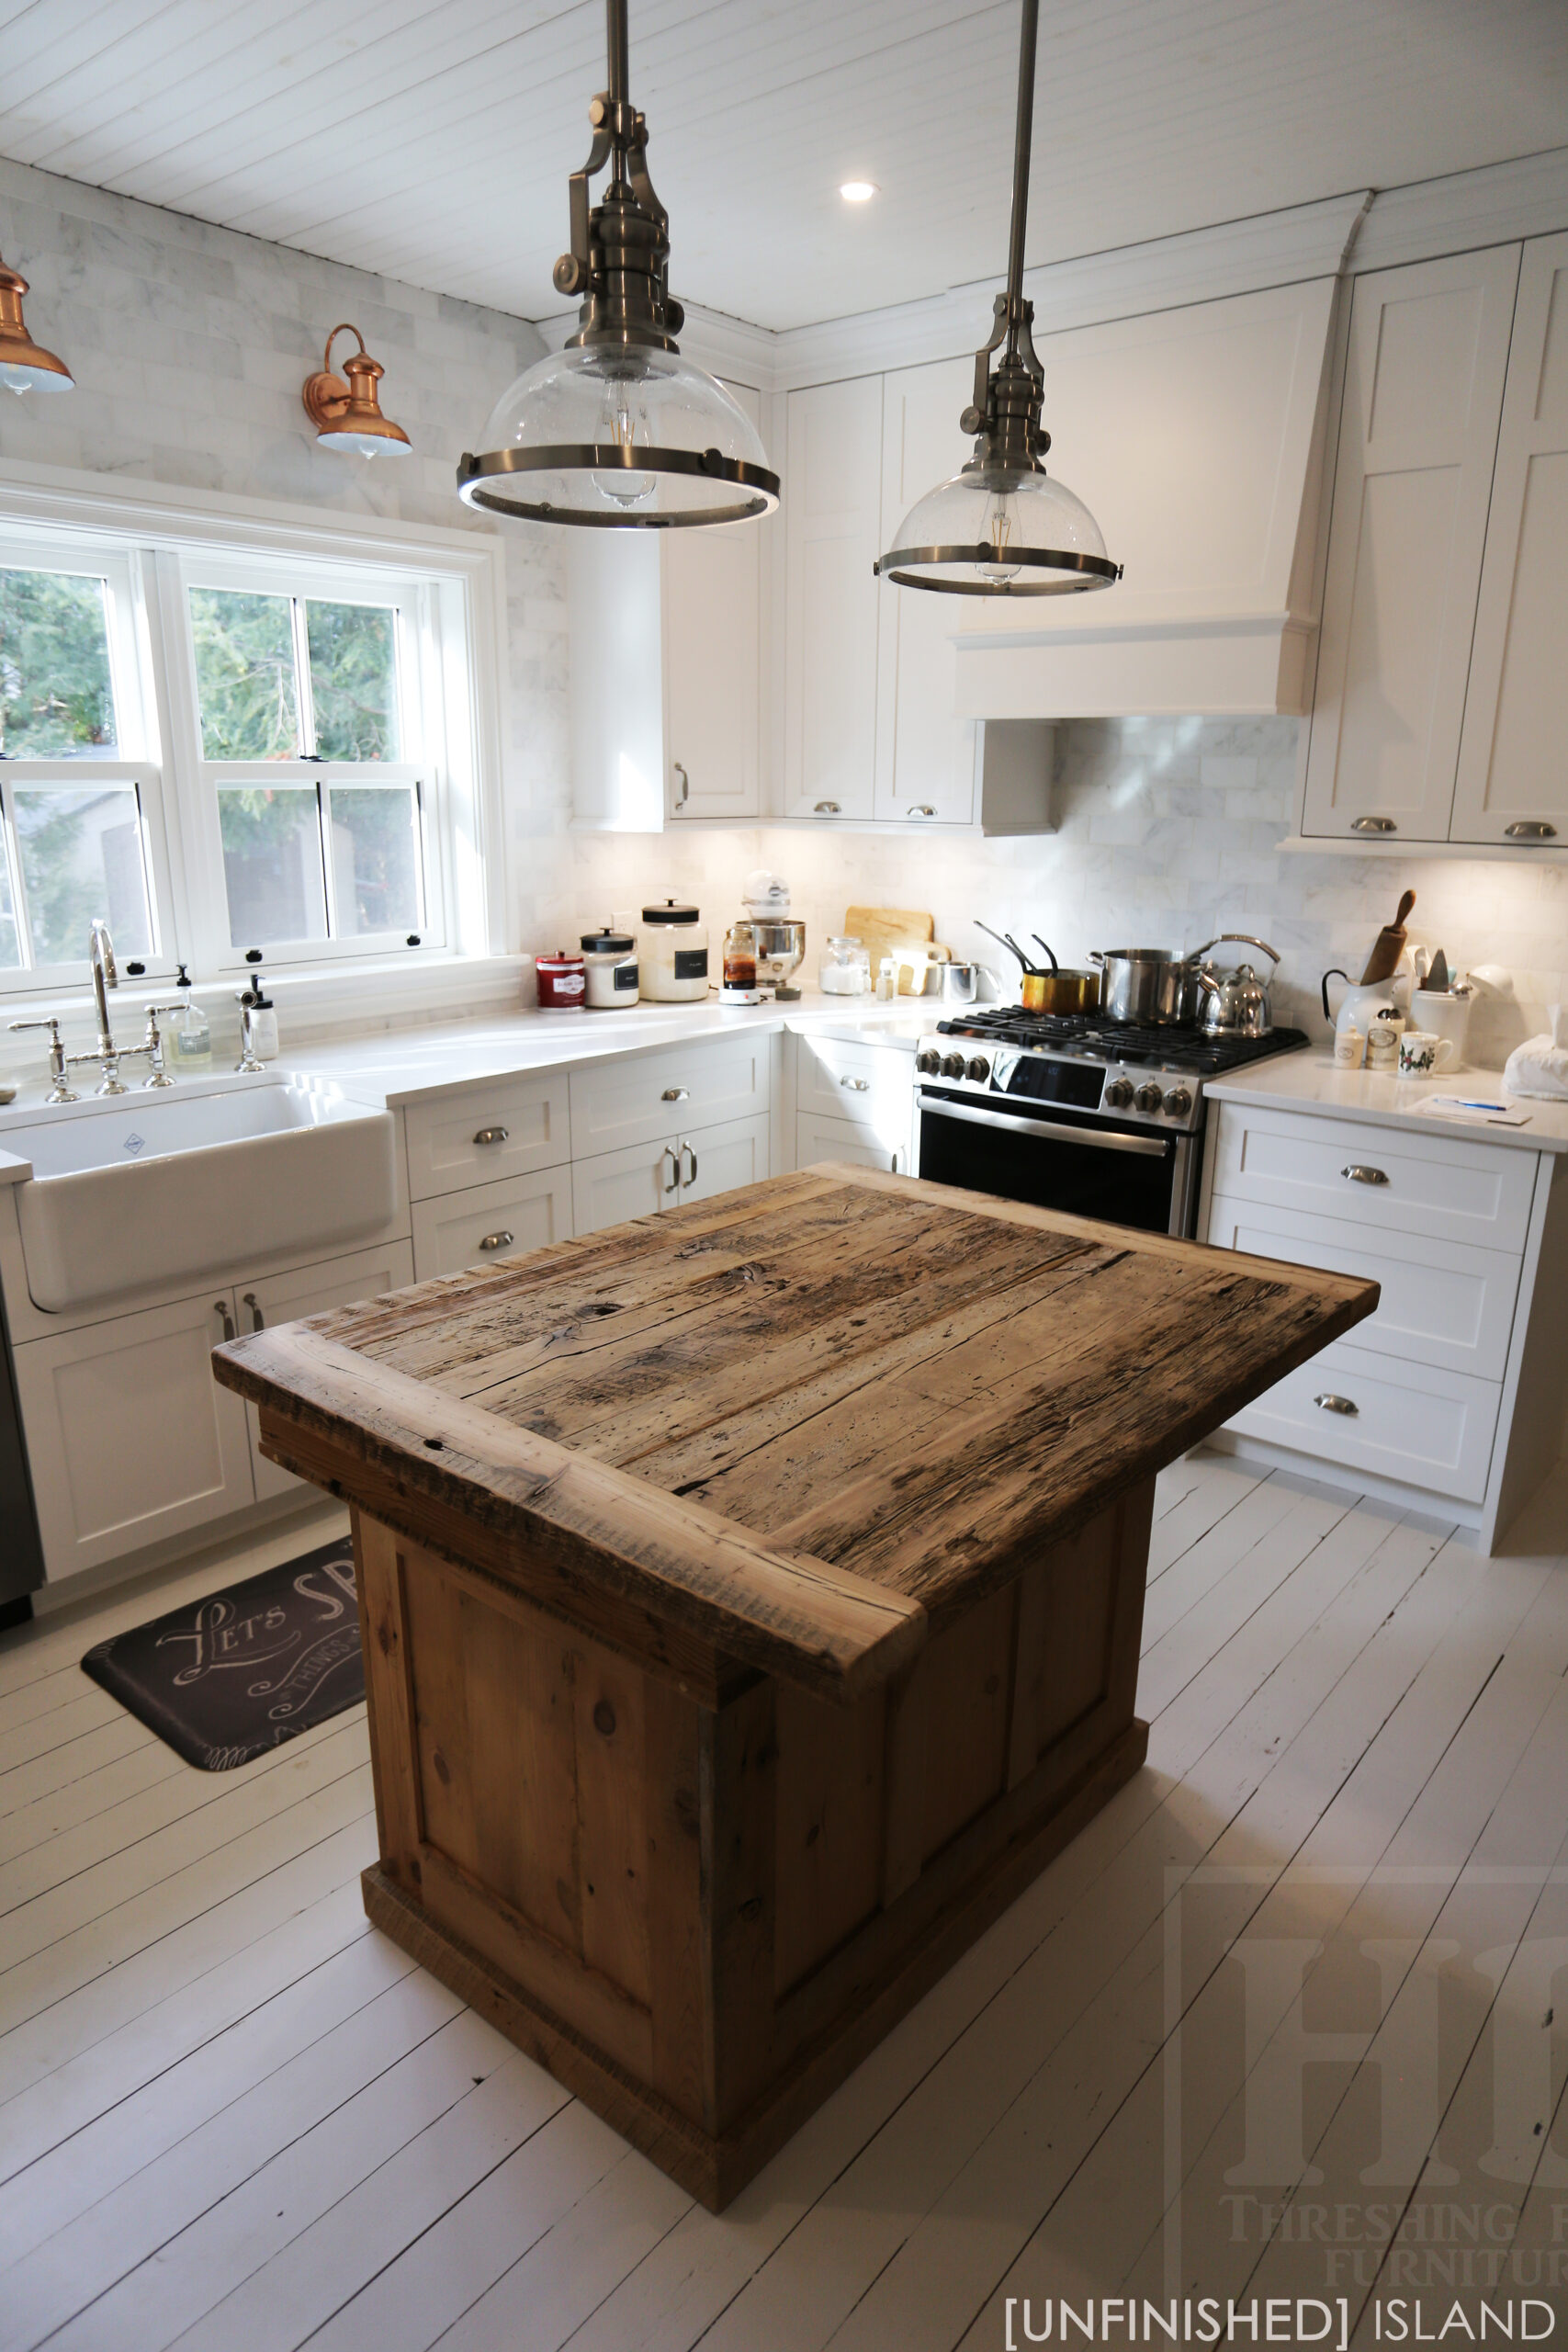 48” Reclaimed Ontario Barnwood Island we made for a Burlington, Ontario home – 39” wide – 2 Doors / 1 Drawer – Skirting - Old Growth Hemlock Threshing Floor & Grainery Board Construction - Original edges & distressing maintained – Bread Edge Ends – Unfinished - www.table.ca